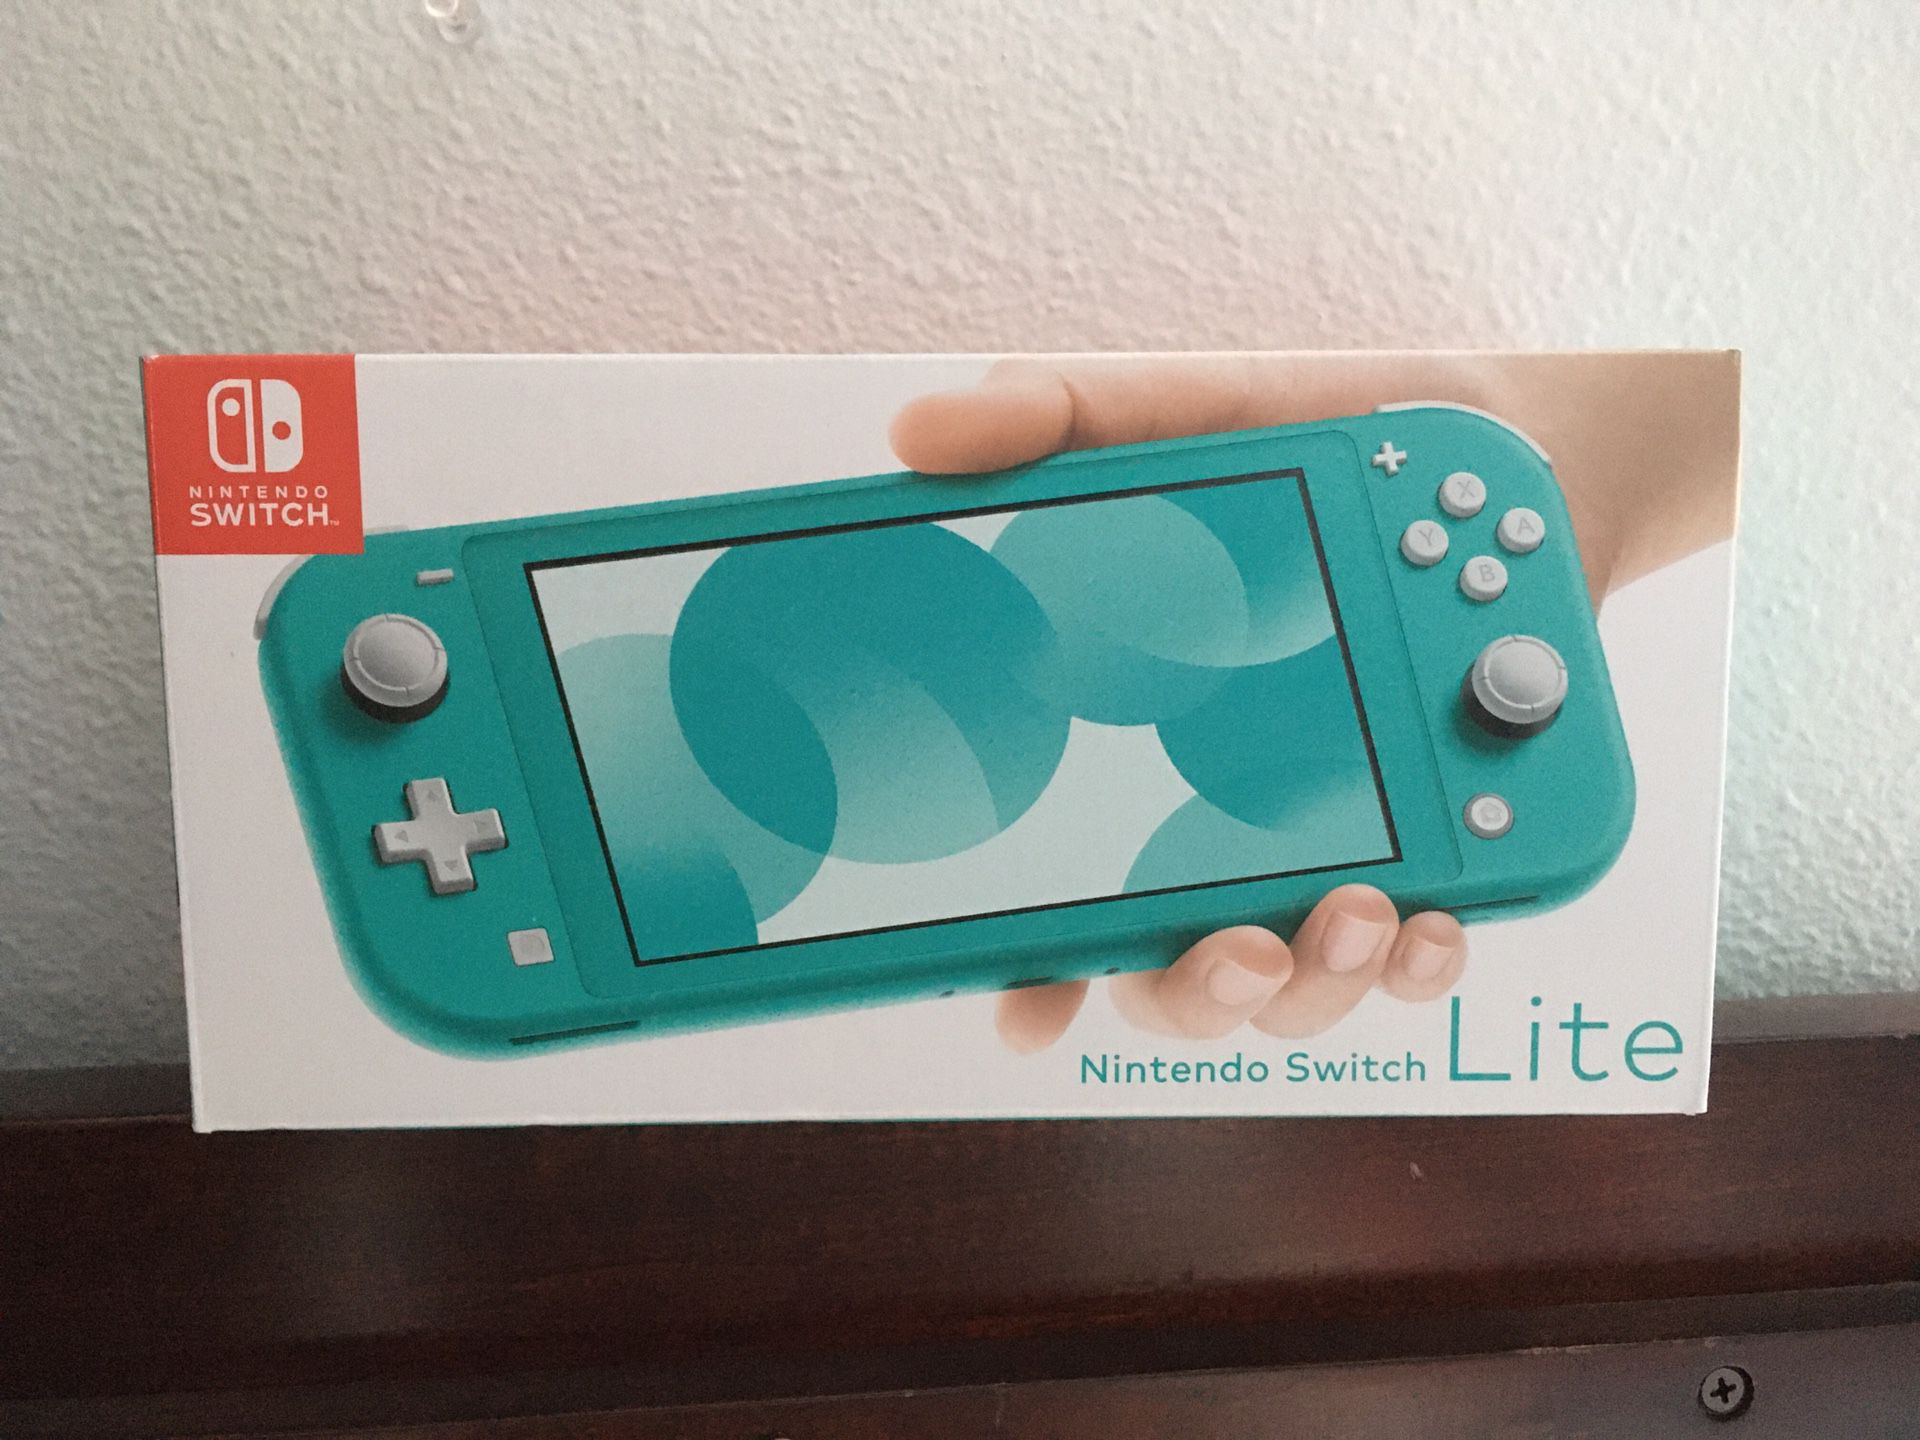 Nintendo Switch Lite. Brand new in hand. Turquoise in color. Cash only no trades. $260 firm